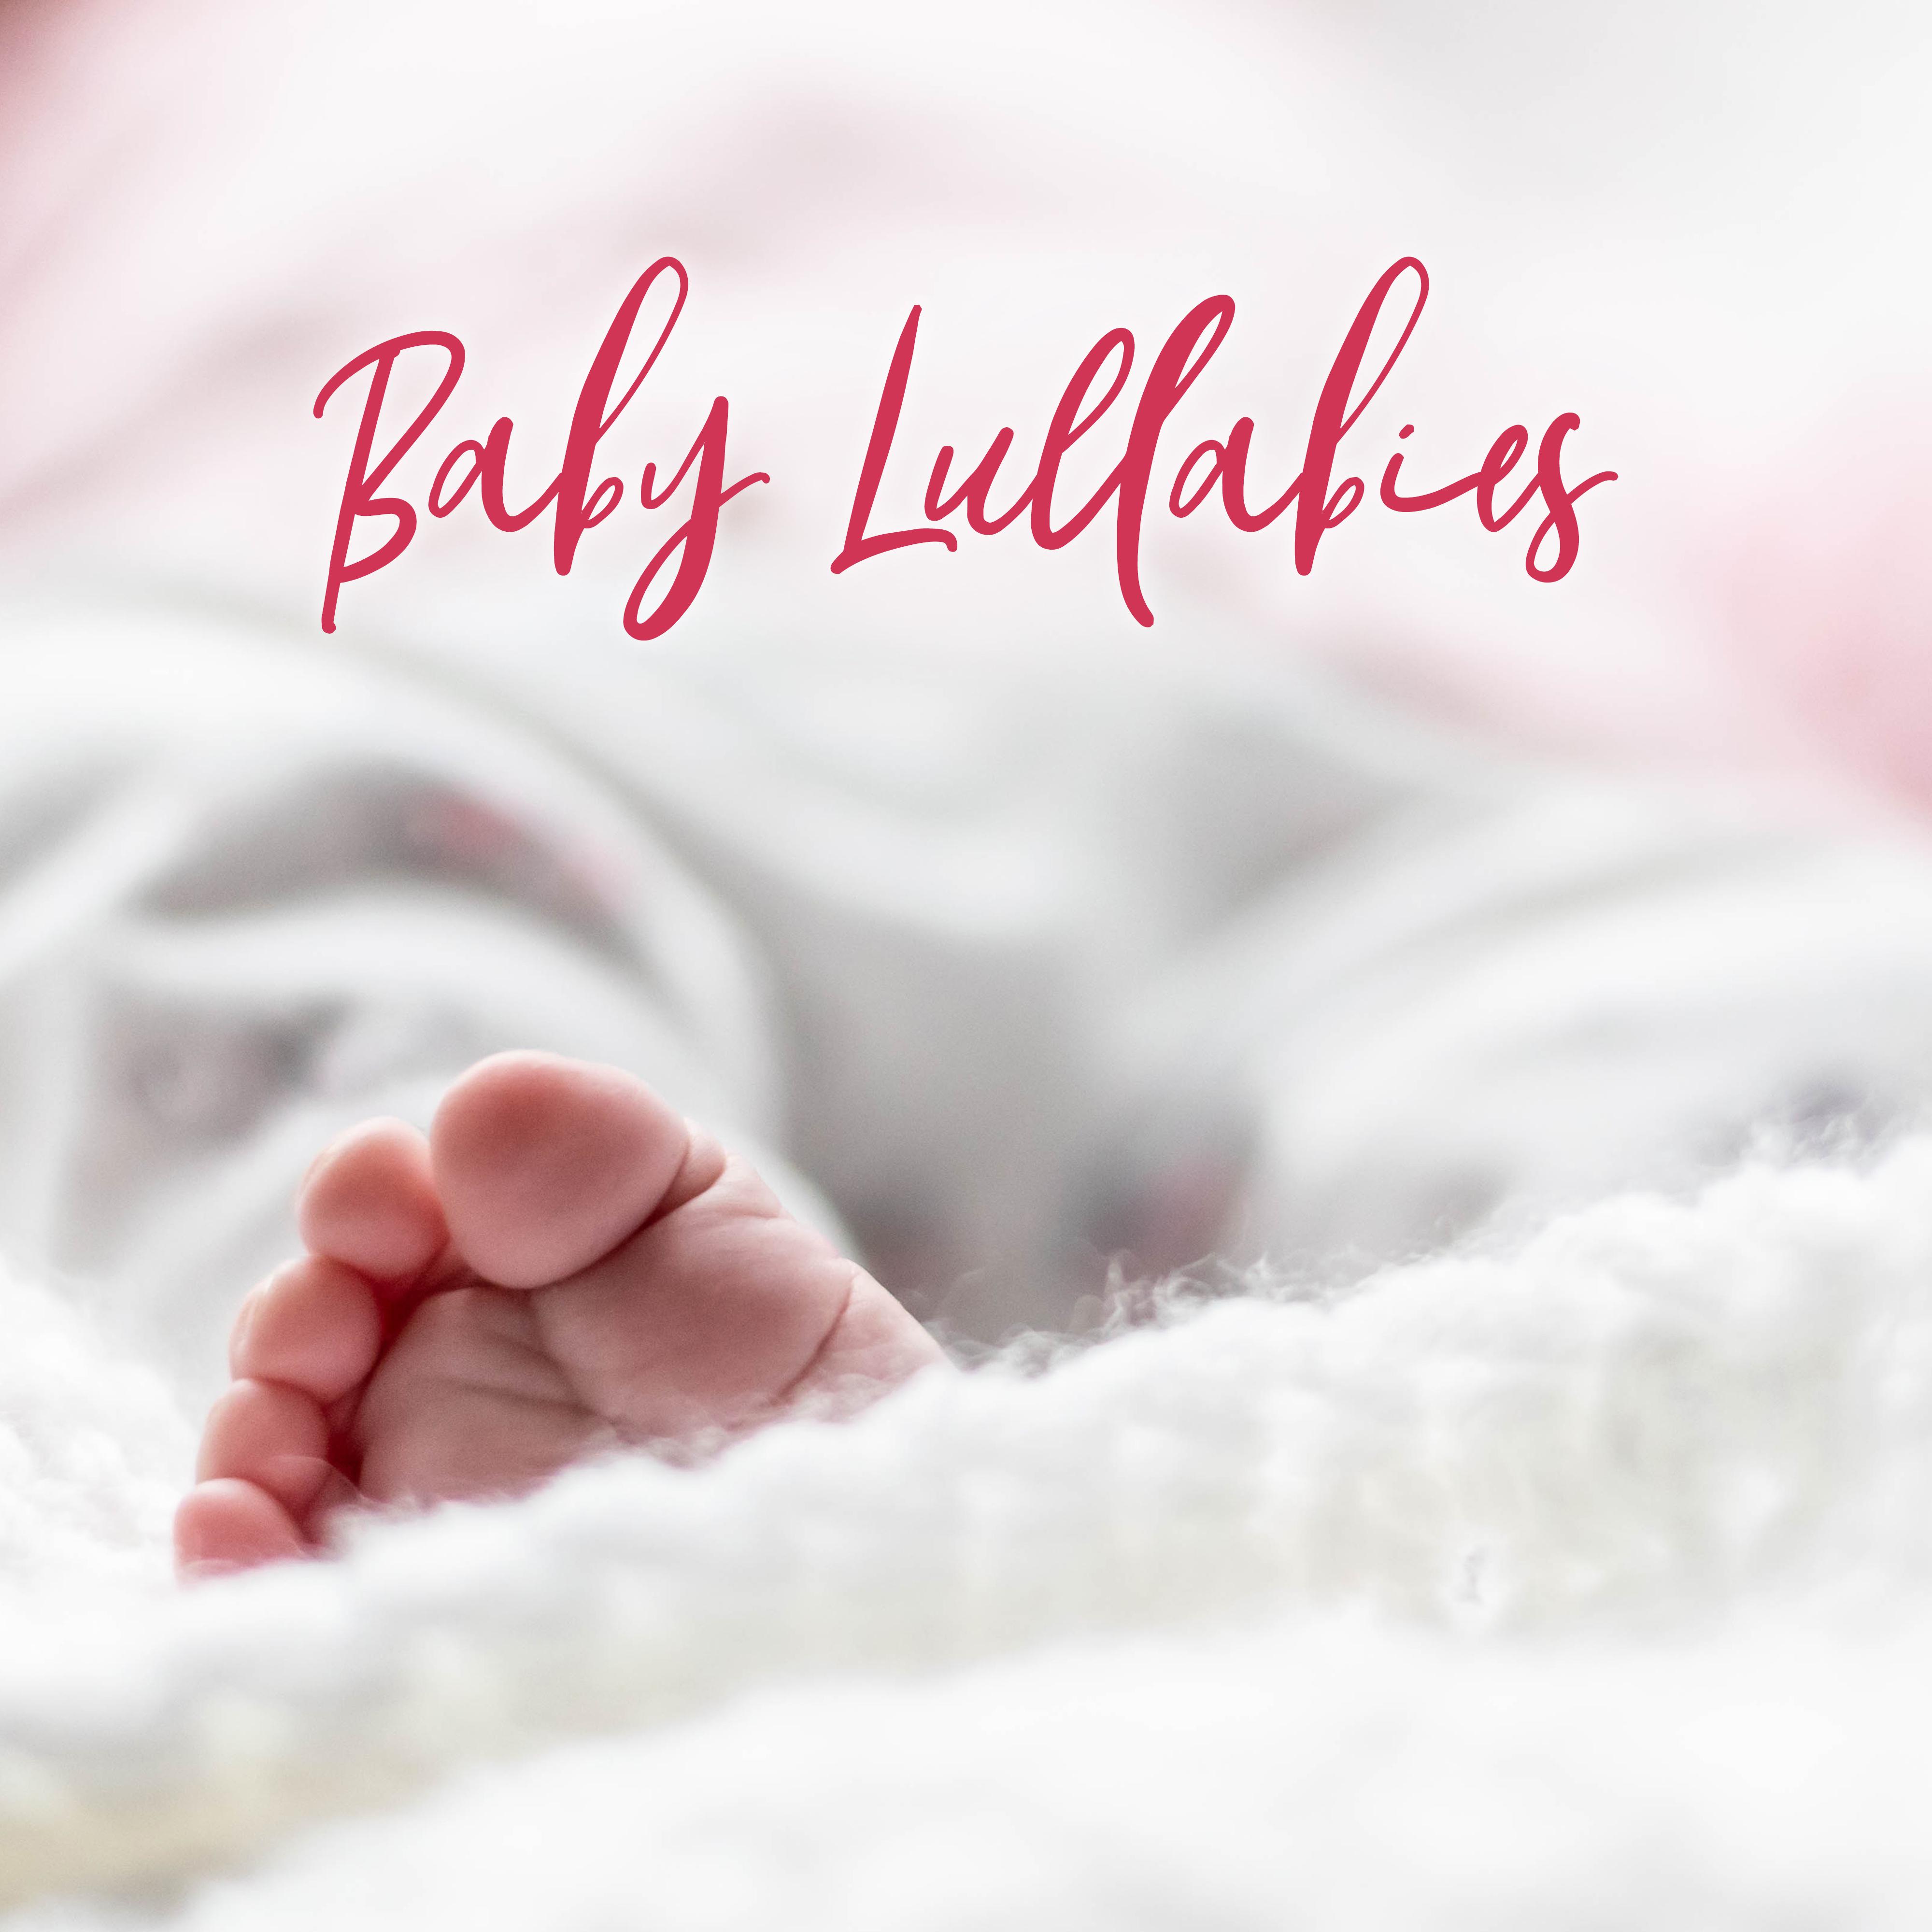 Baby Lullabies  Relaxing Sounds for Baby, Peaceful Sleep, Calming Lullabies, Night Melodies, Soothing Nature Sounds for Kids